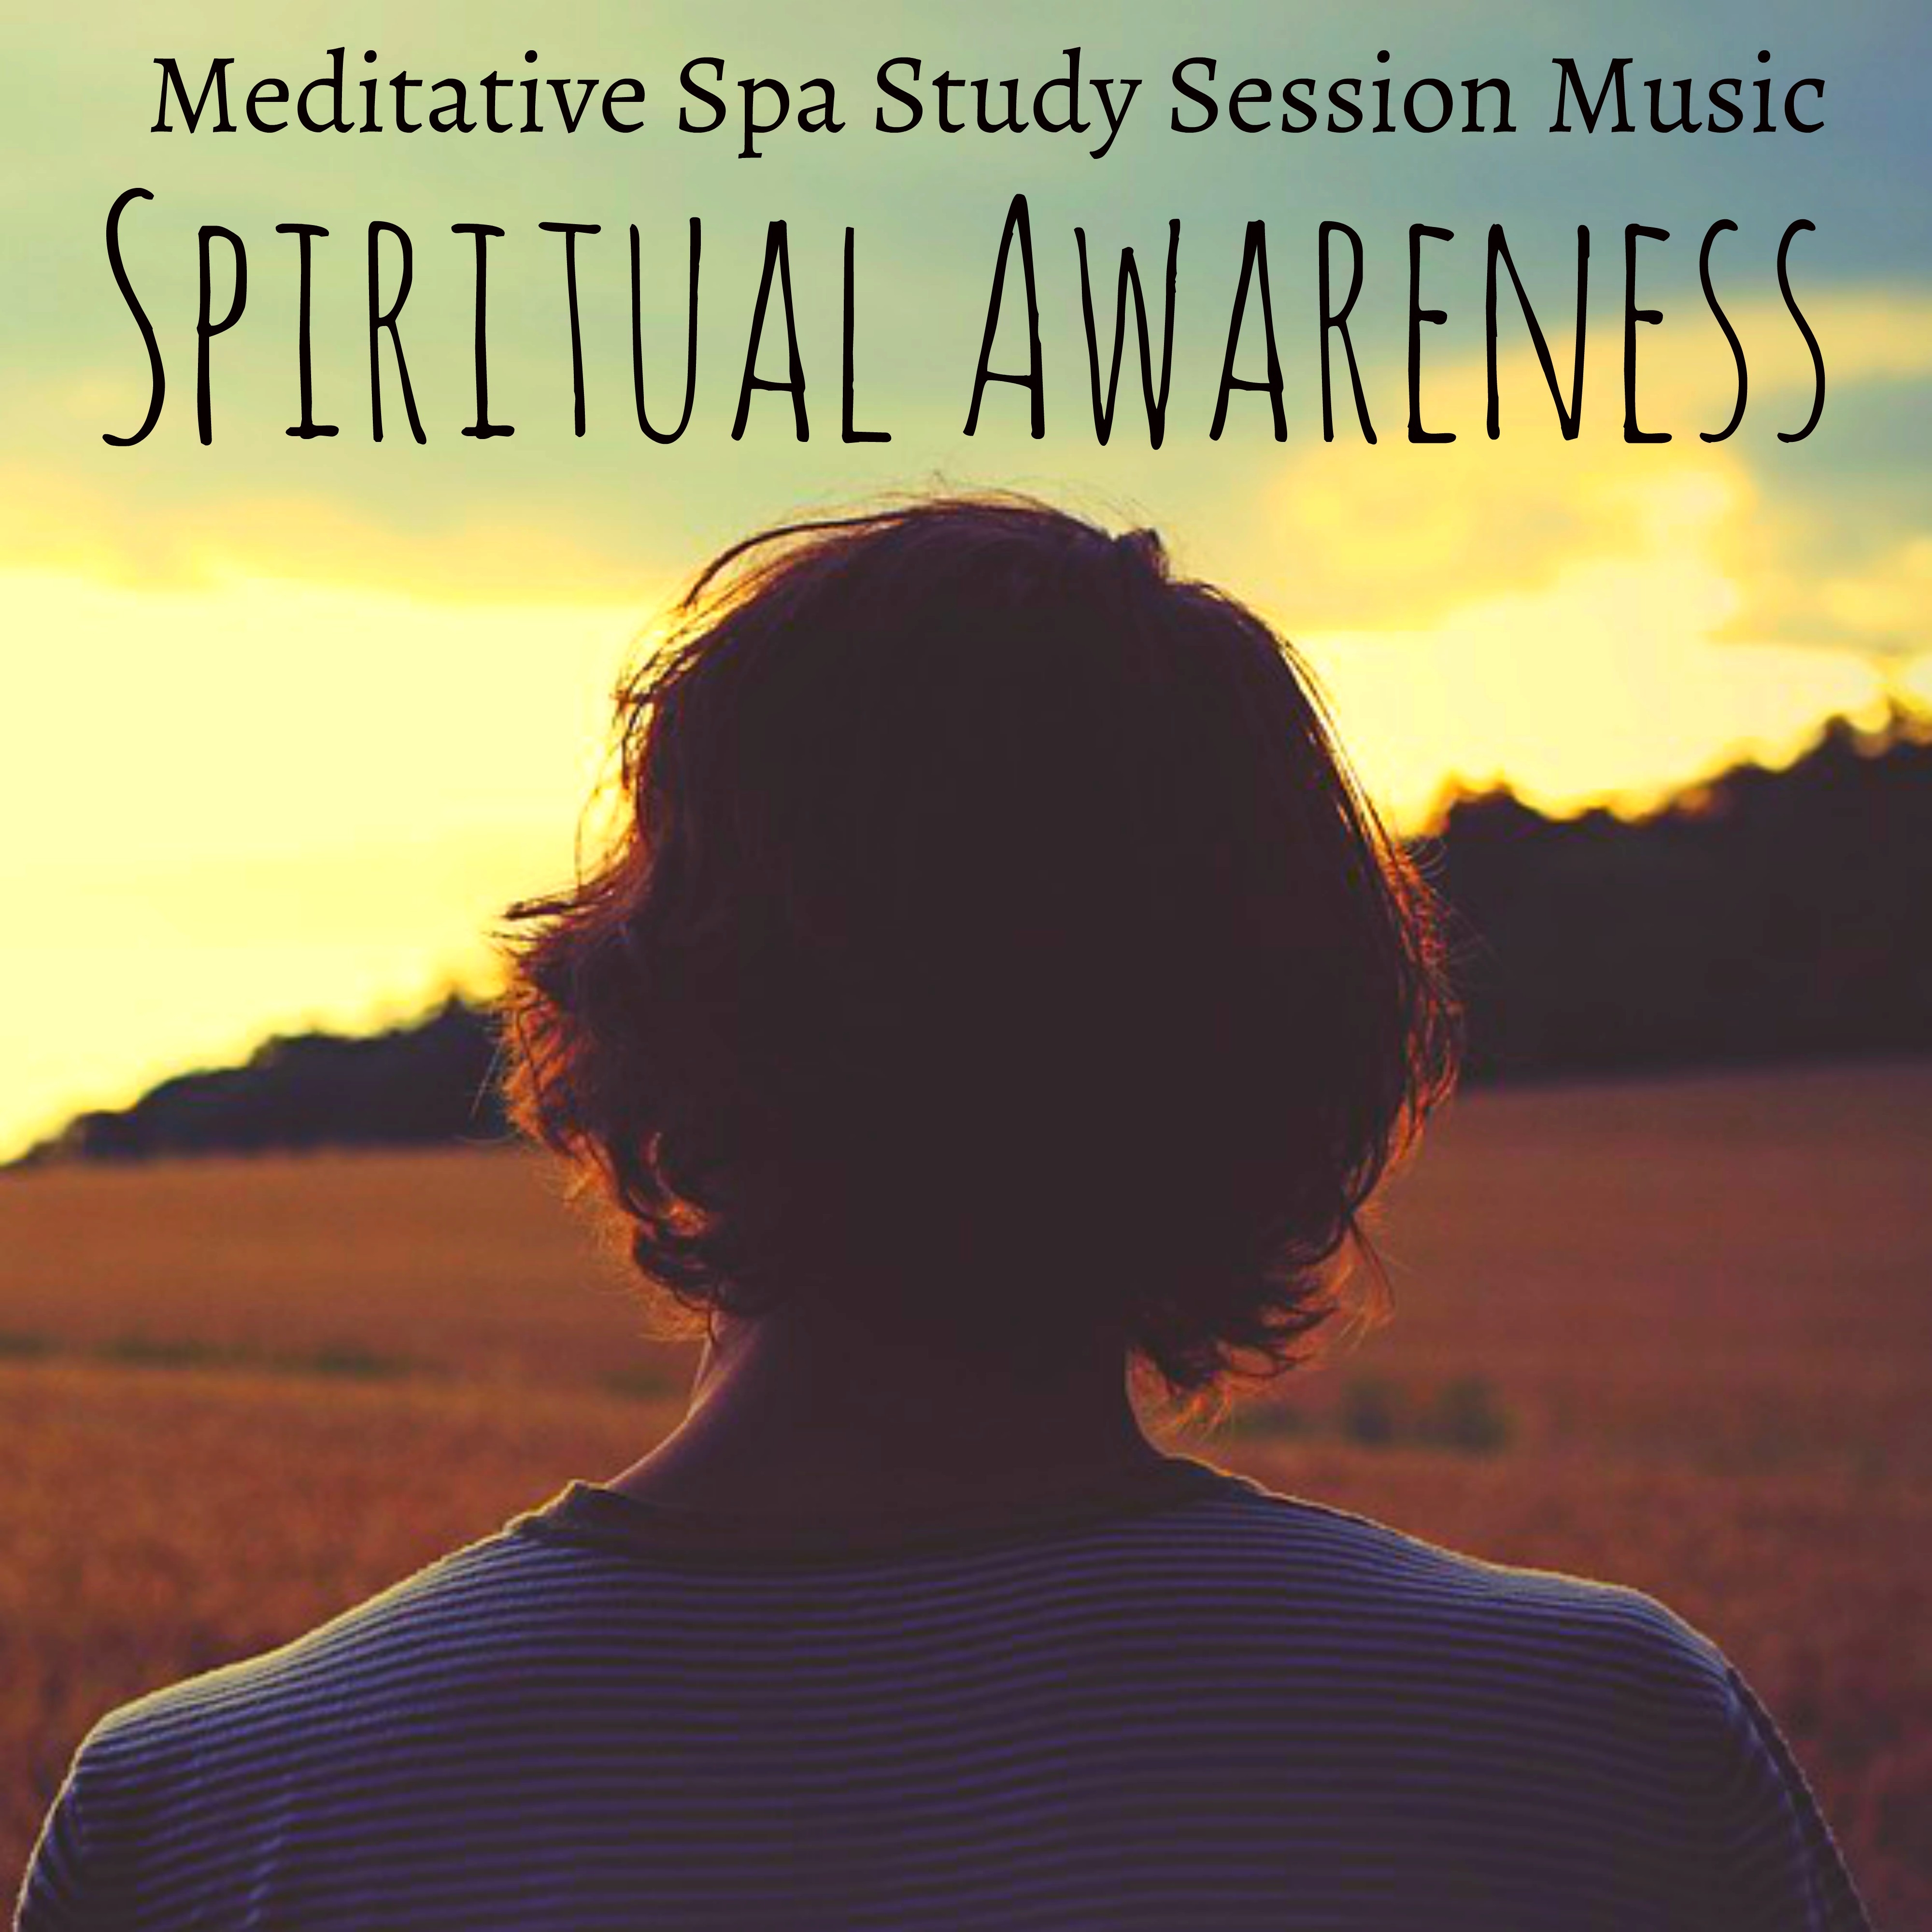 Spiritual Awareness - Meditative Spa Study Session Music for Deep Relaxation Massage Therapy Natural Remedies with New Age Instrumental Healing Sounds